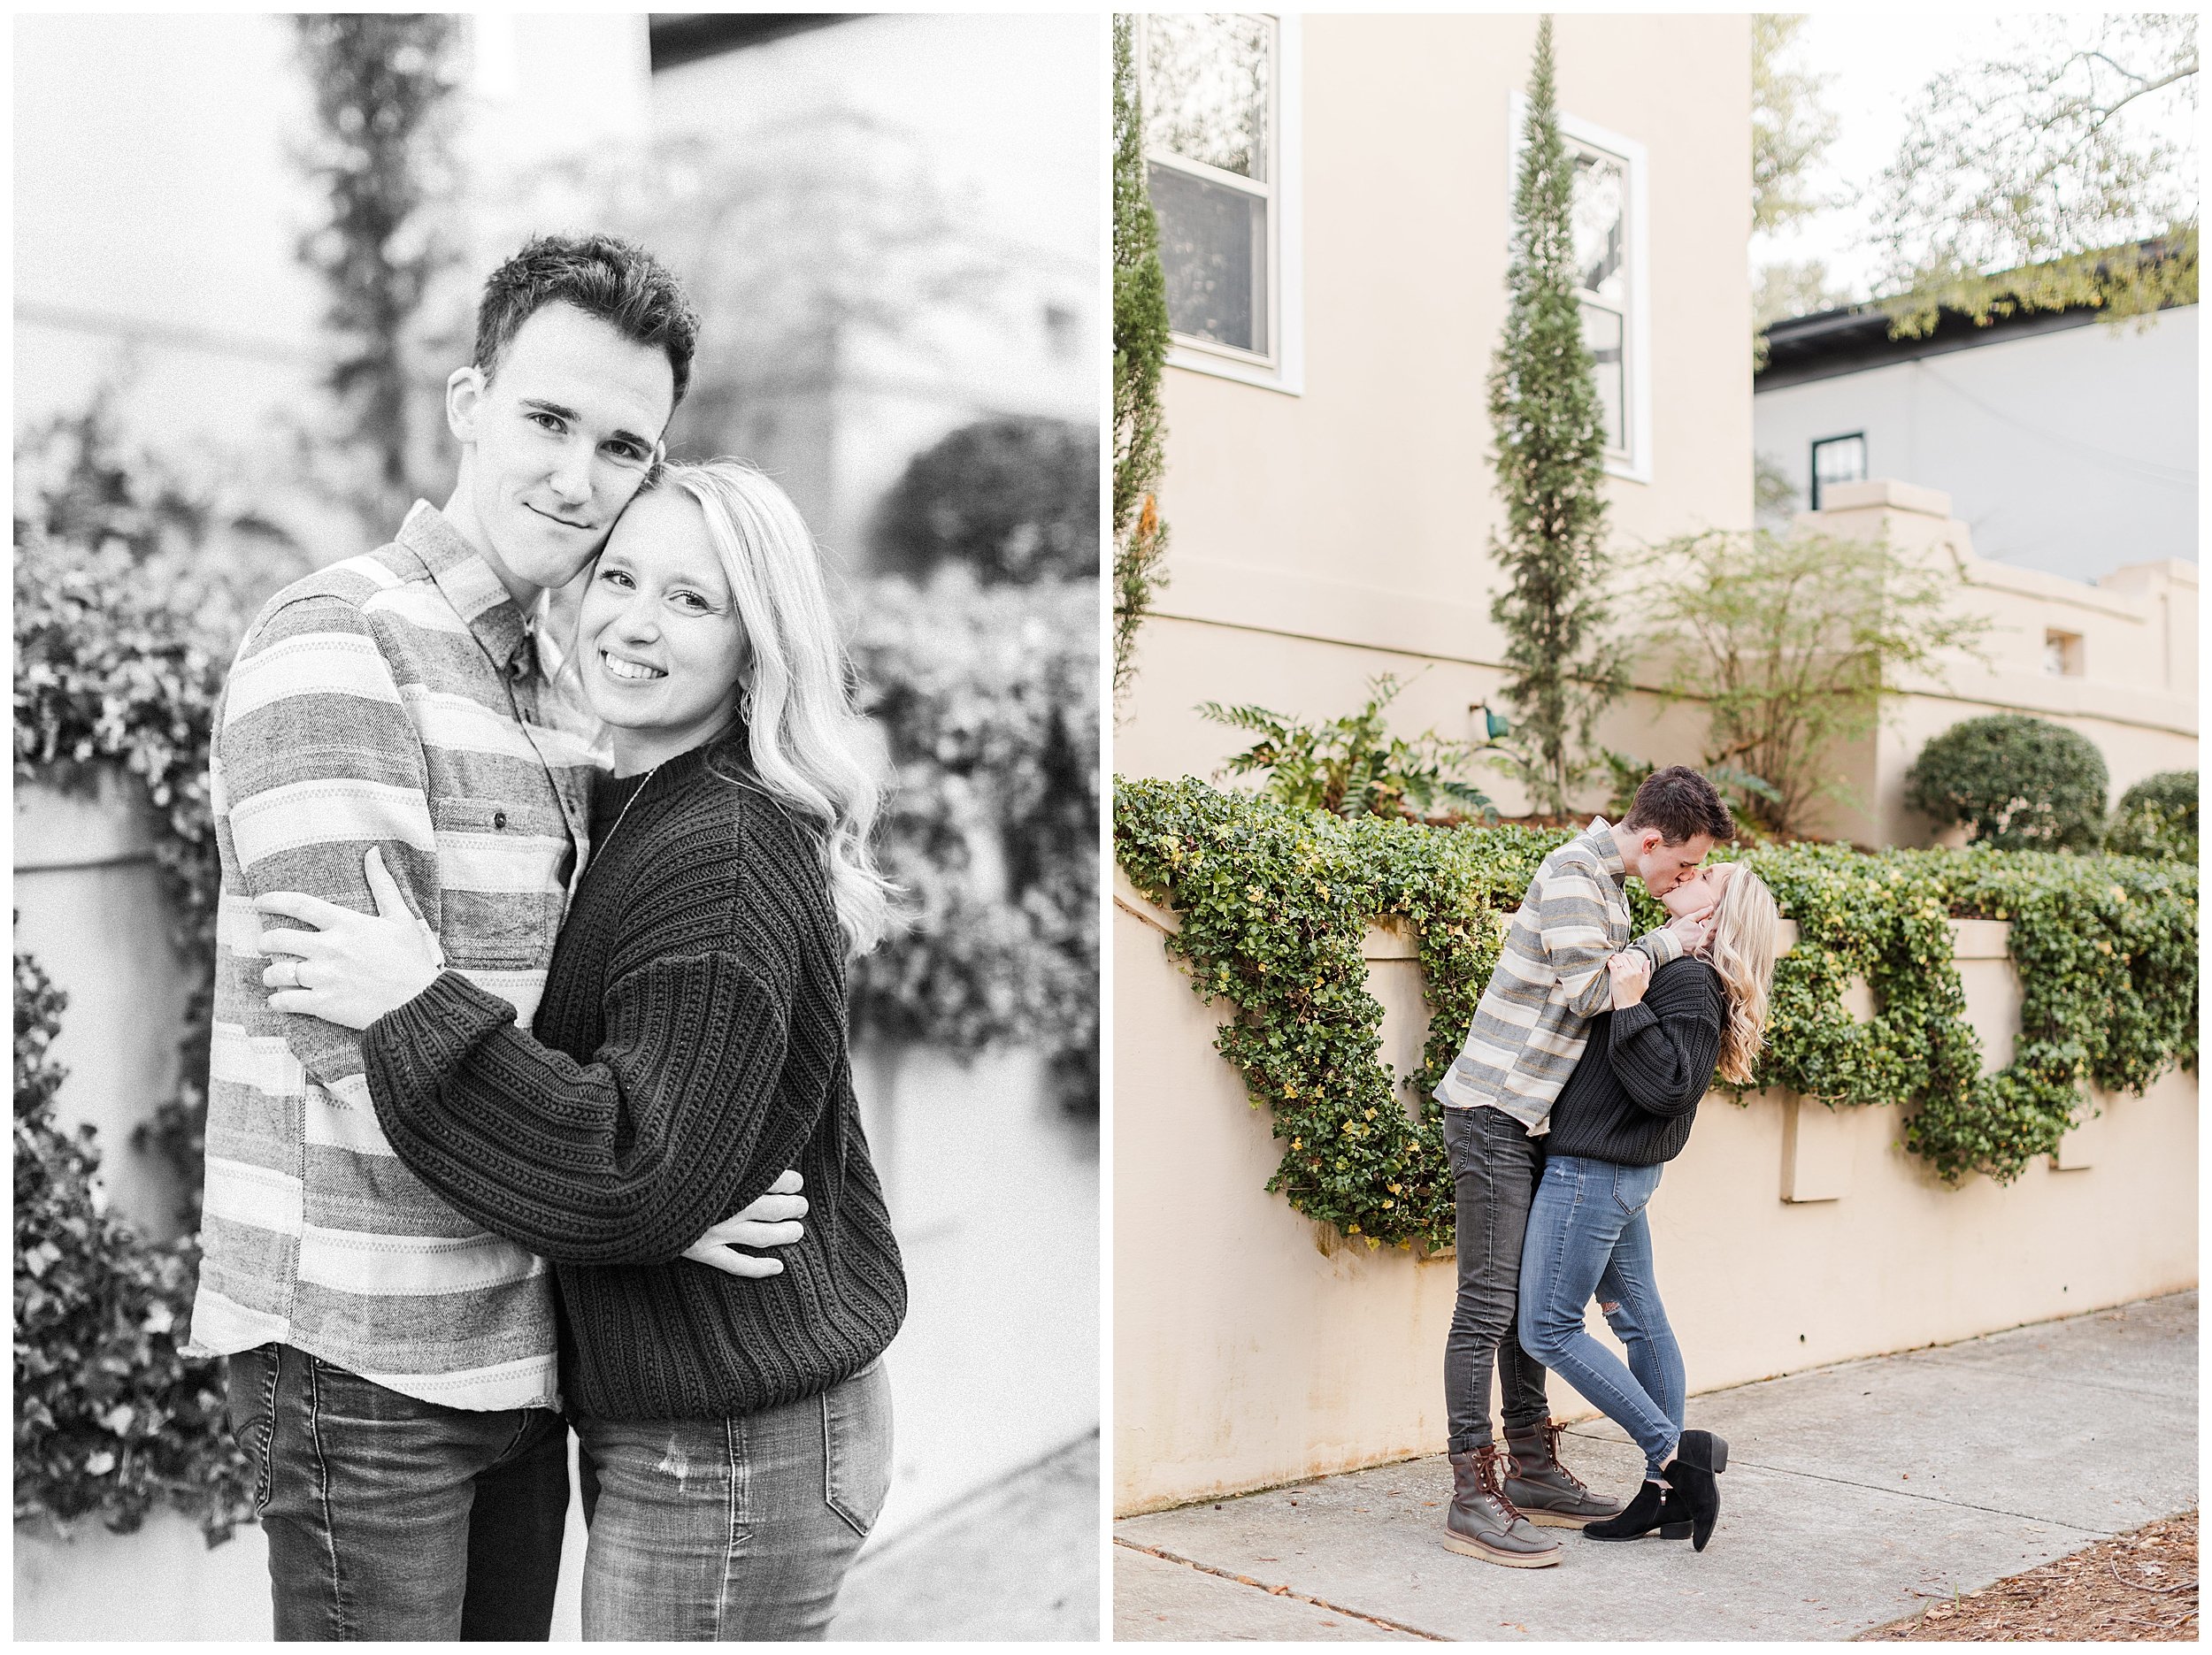 wilmington riverwalk and historic district engagement session ashley christ photography wilmington wedding photographer_0066.jpg